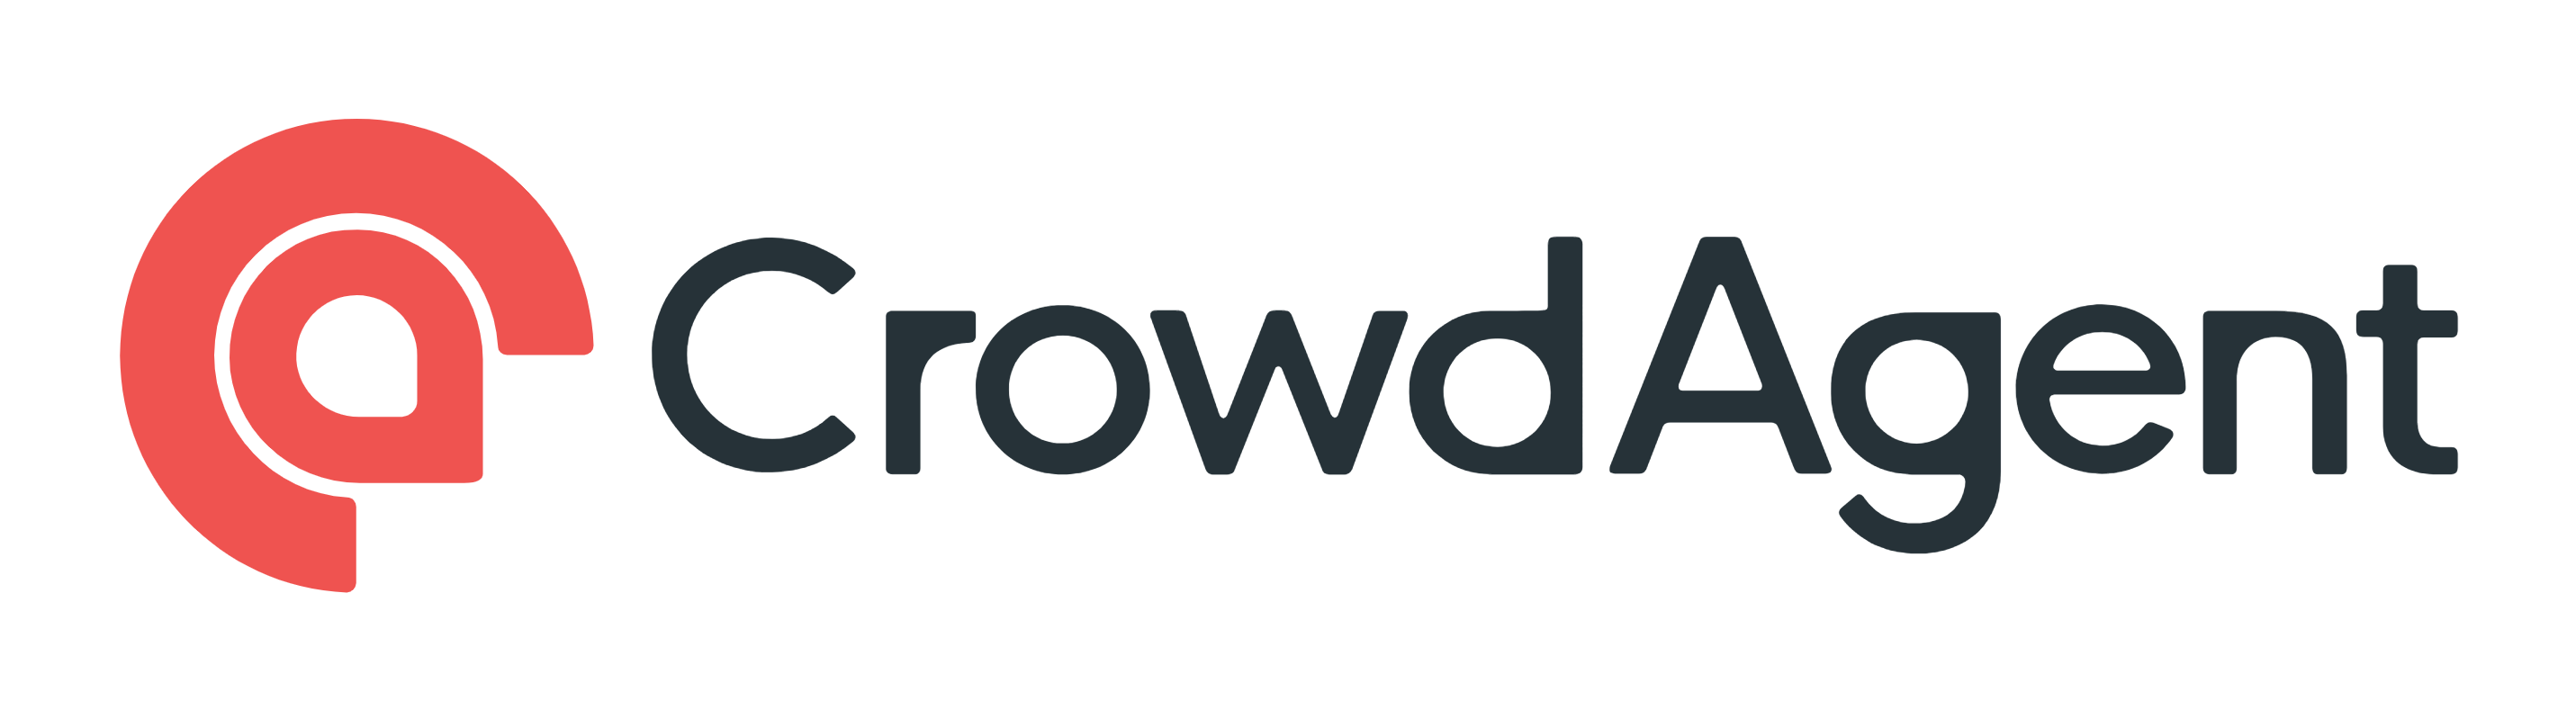 crowd_agent_logo_type1 (1).png